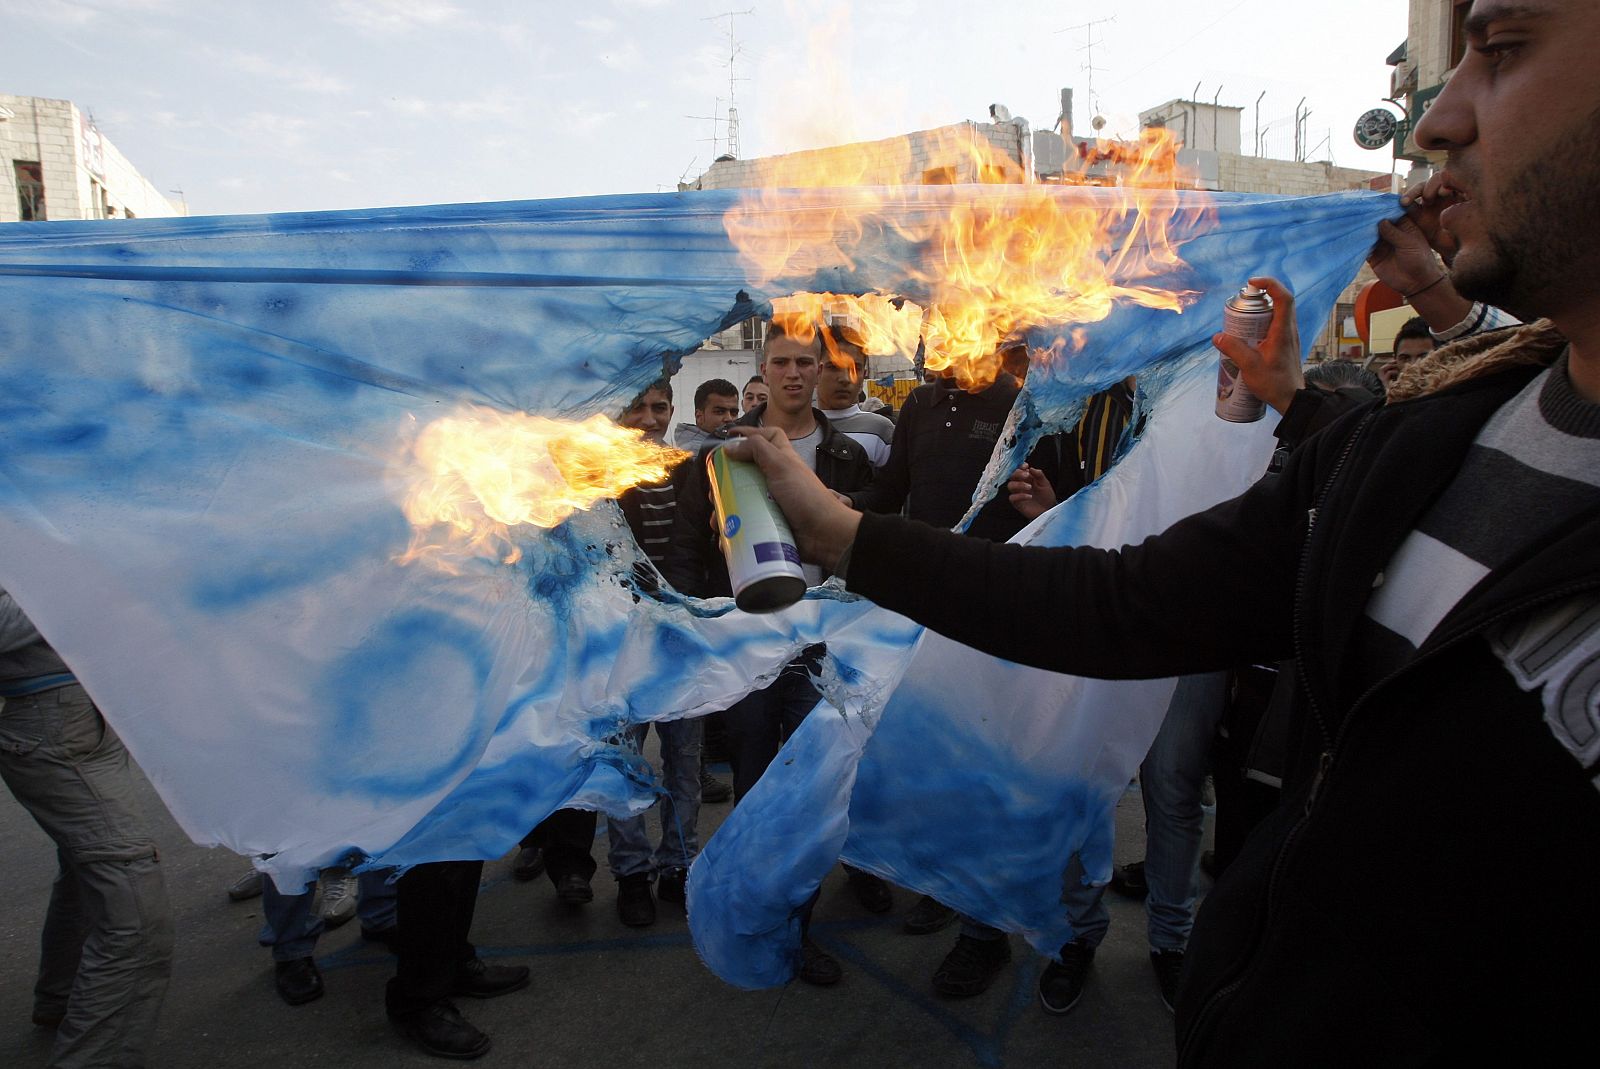 Palestinians burn a mock Israeli national flag with the word Al Jazeera during a protest in Ramallah